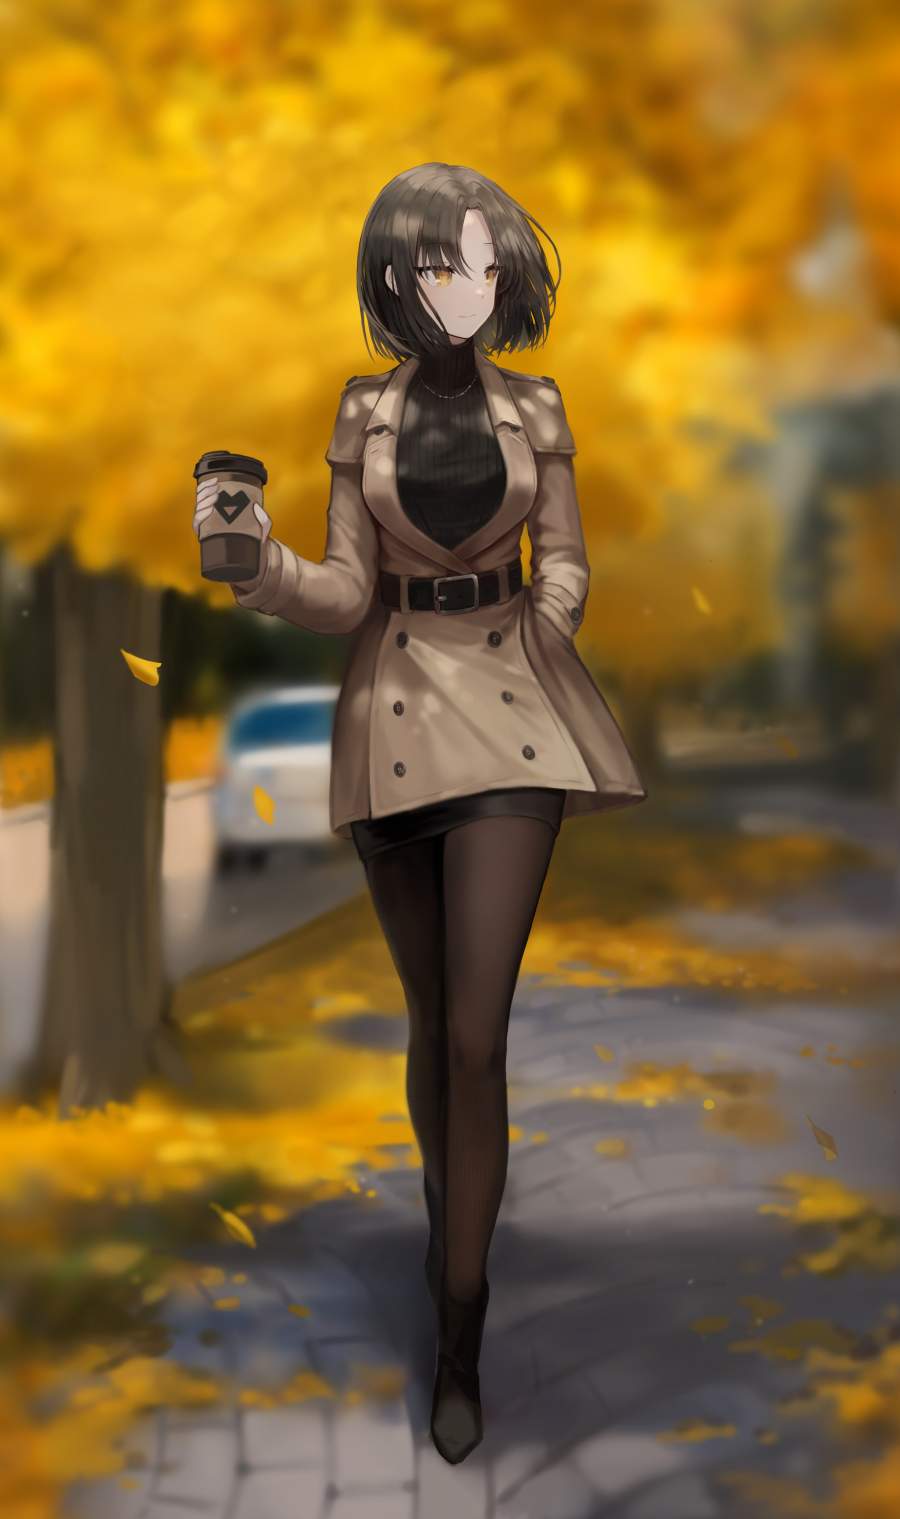 Anime Girl With Coffee iPhone Wallpaper